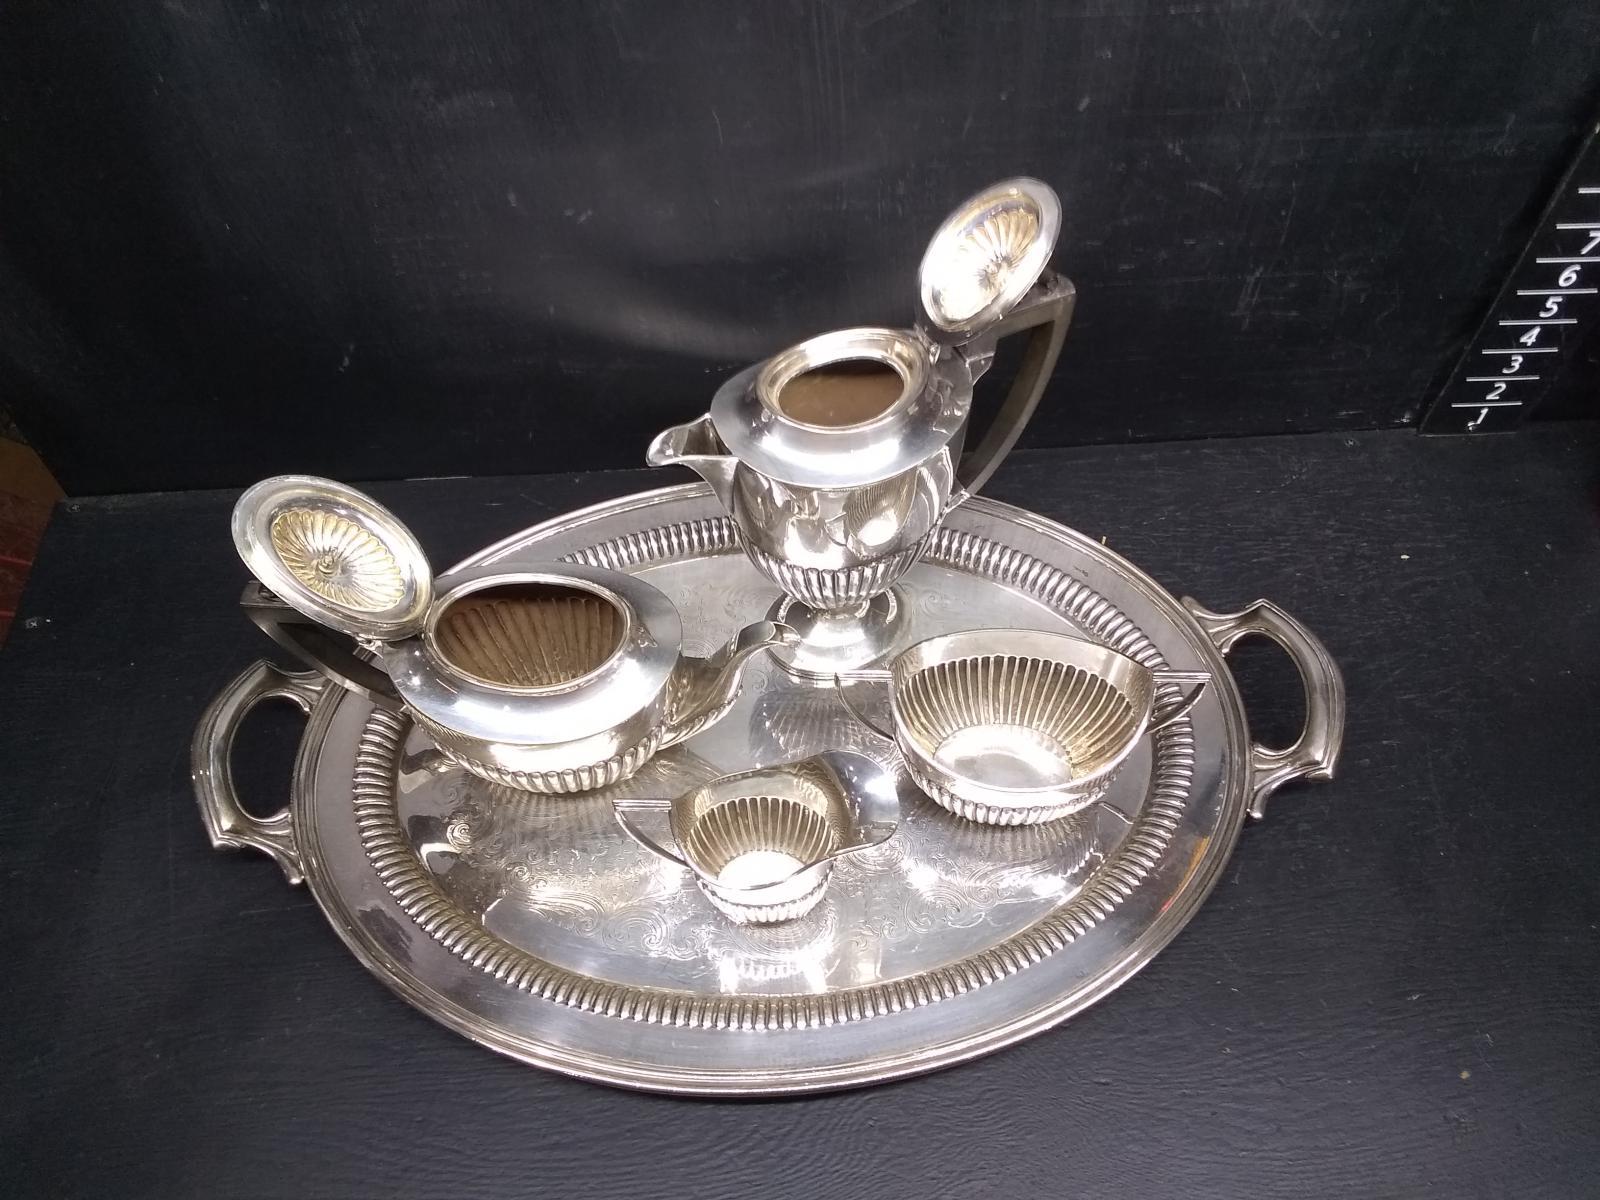 Vintage M & Co. Silver Plated Tea Set with Tray